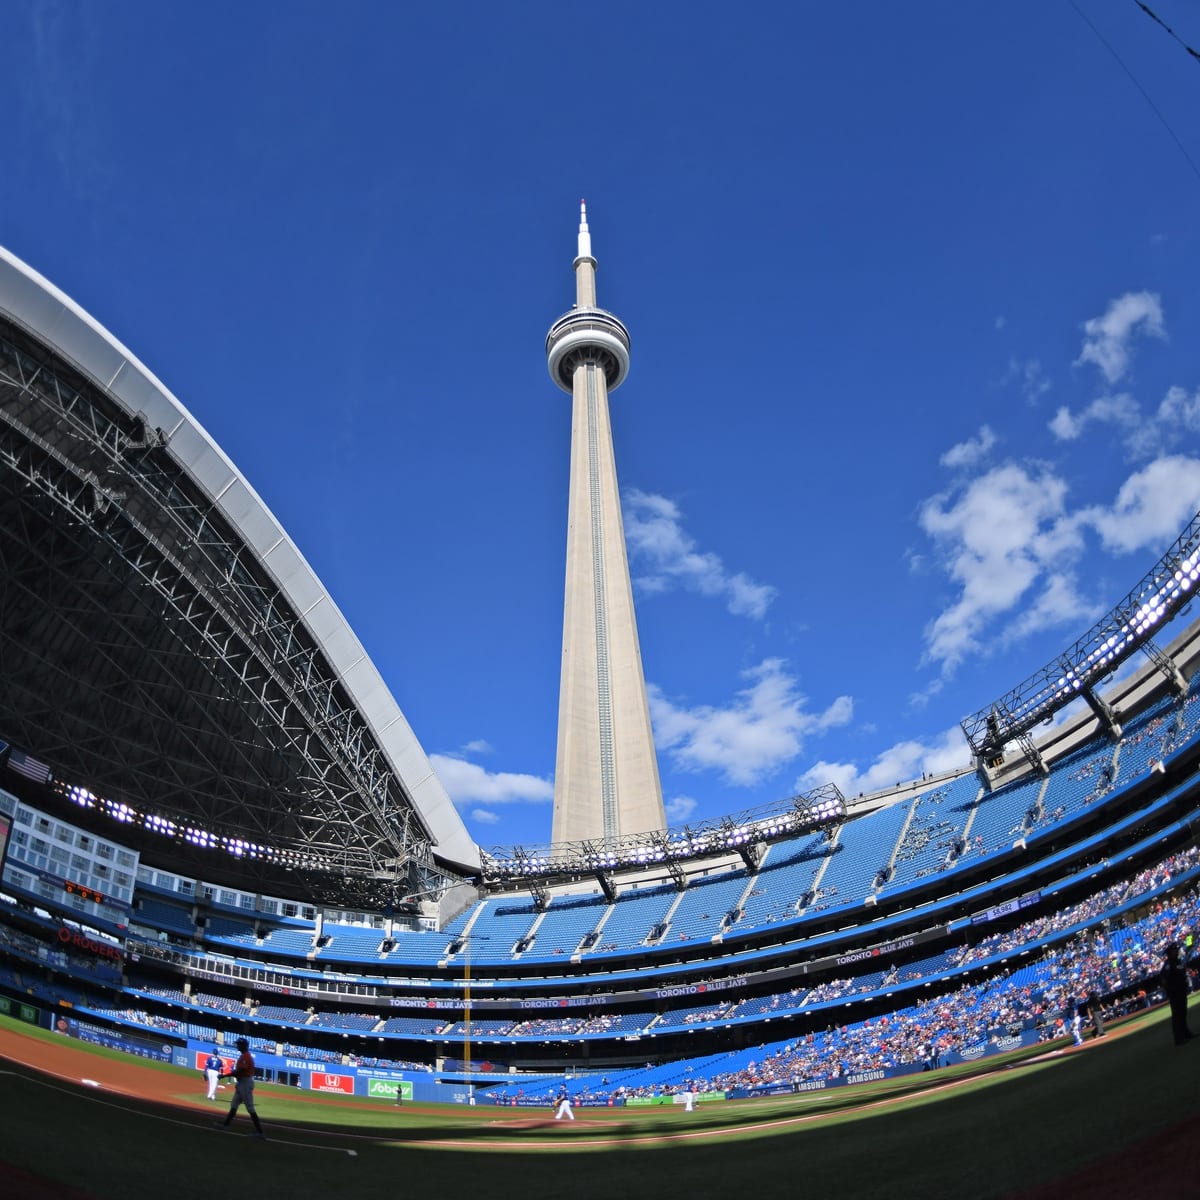 Fully-vaccinated Yankees able to bring full roster to Toronto